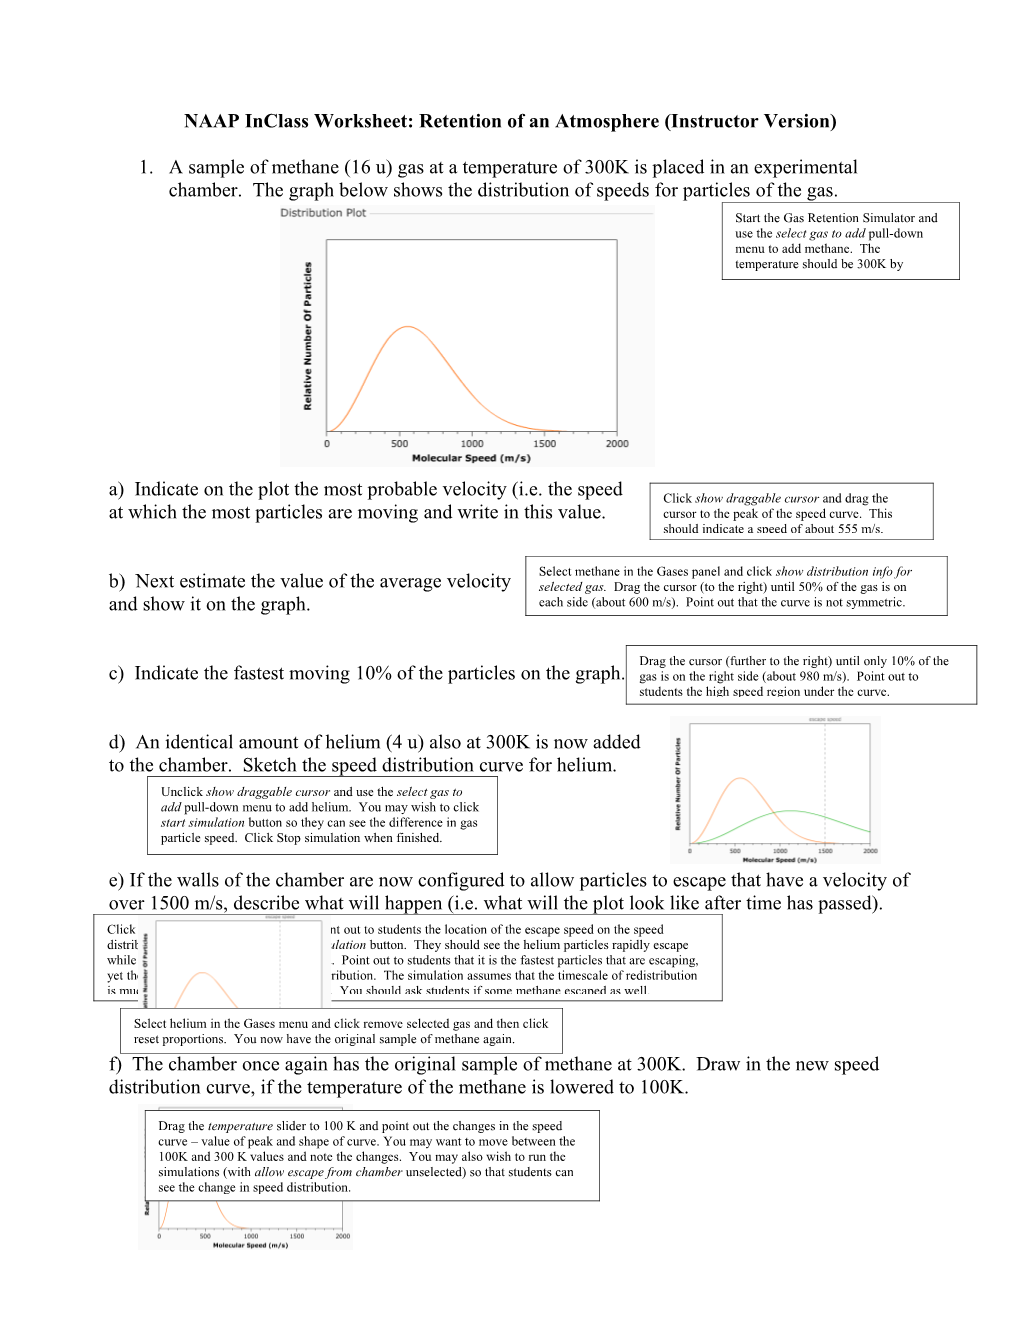 Inclass Worksheet: Retention of an Atmosphere